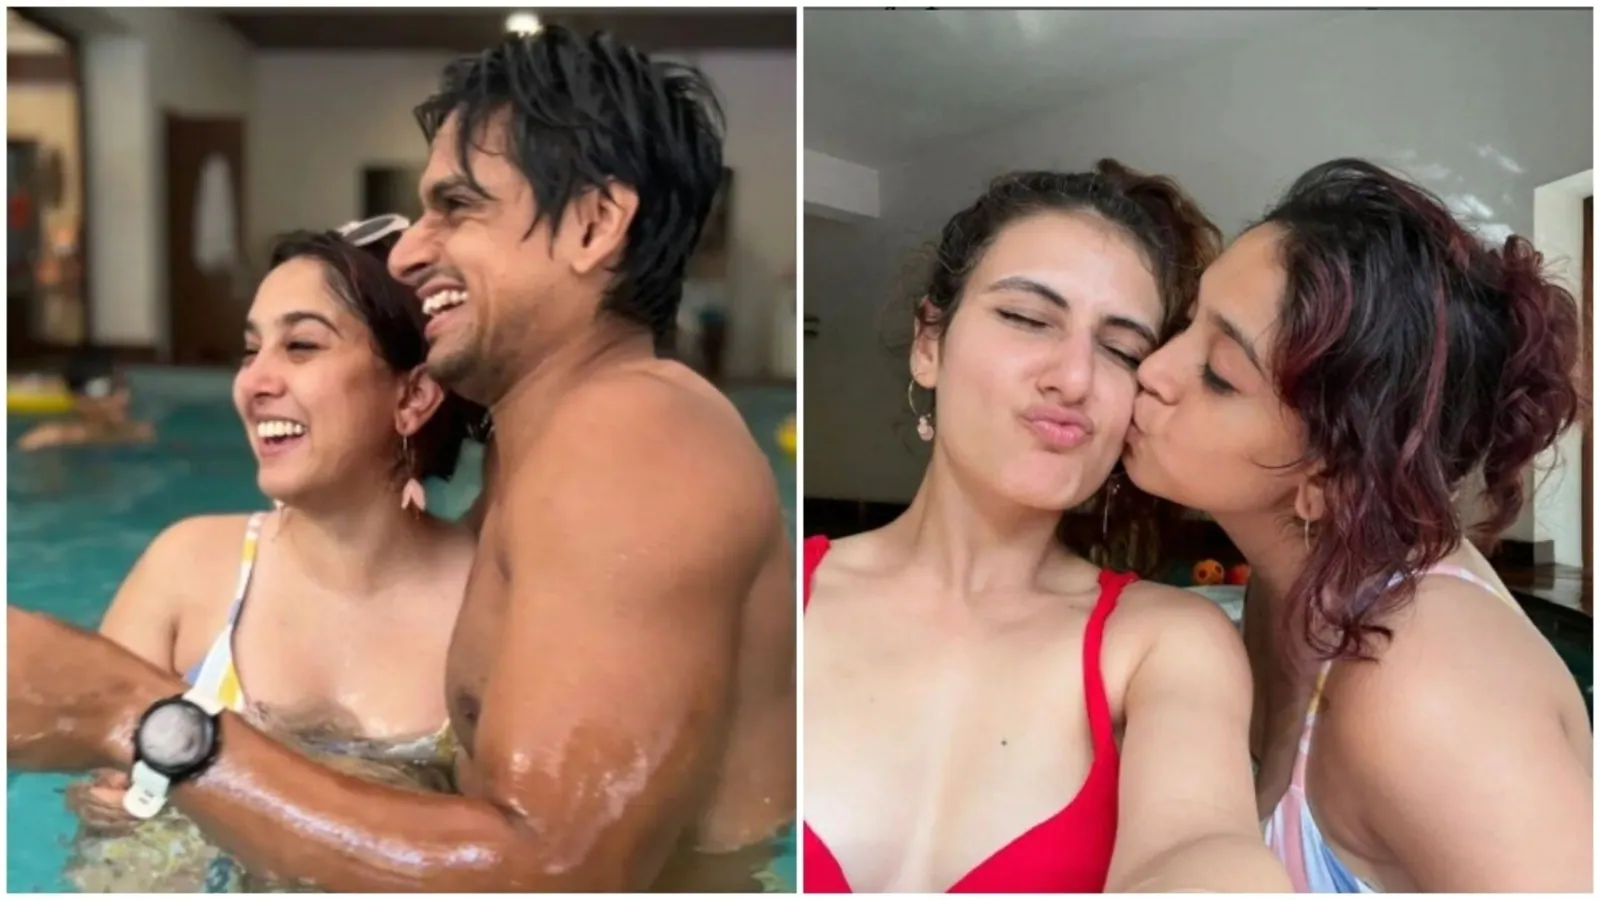 Ira Khan responds to trolls with new pool pics from birthday bash: ‘If everyone is done hating…here’s some more’